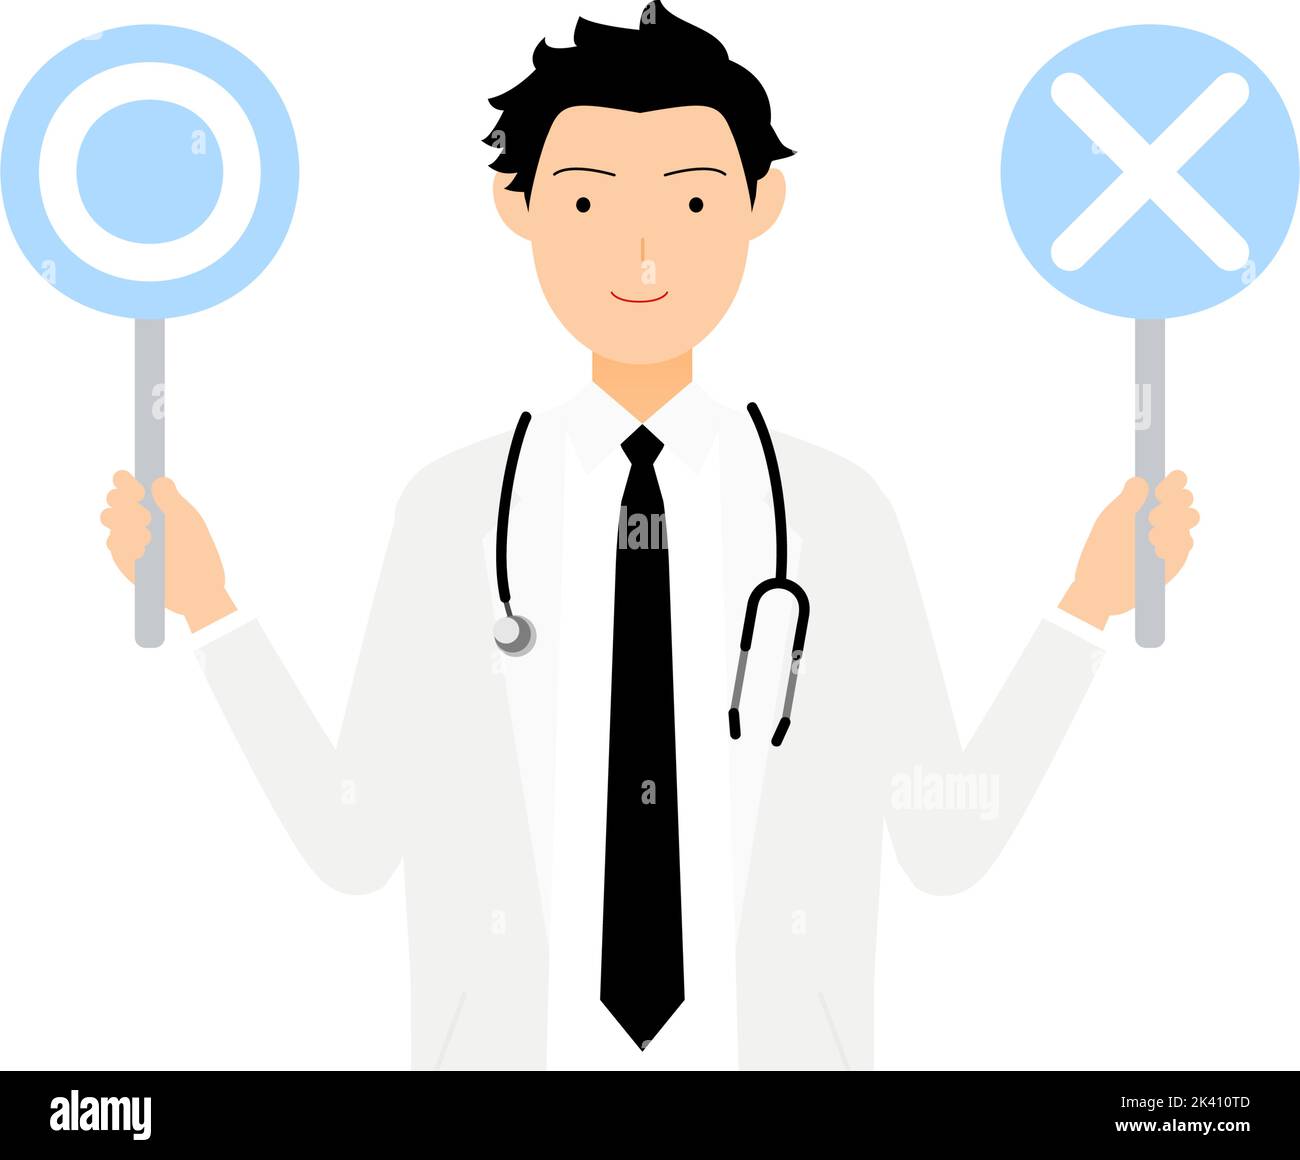 A male doctor in white coat holding a tick-tock stick in a pose of matching answers Stock Vector